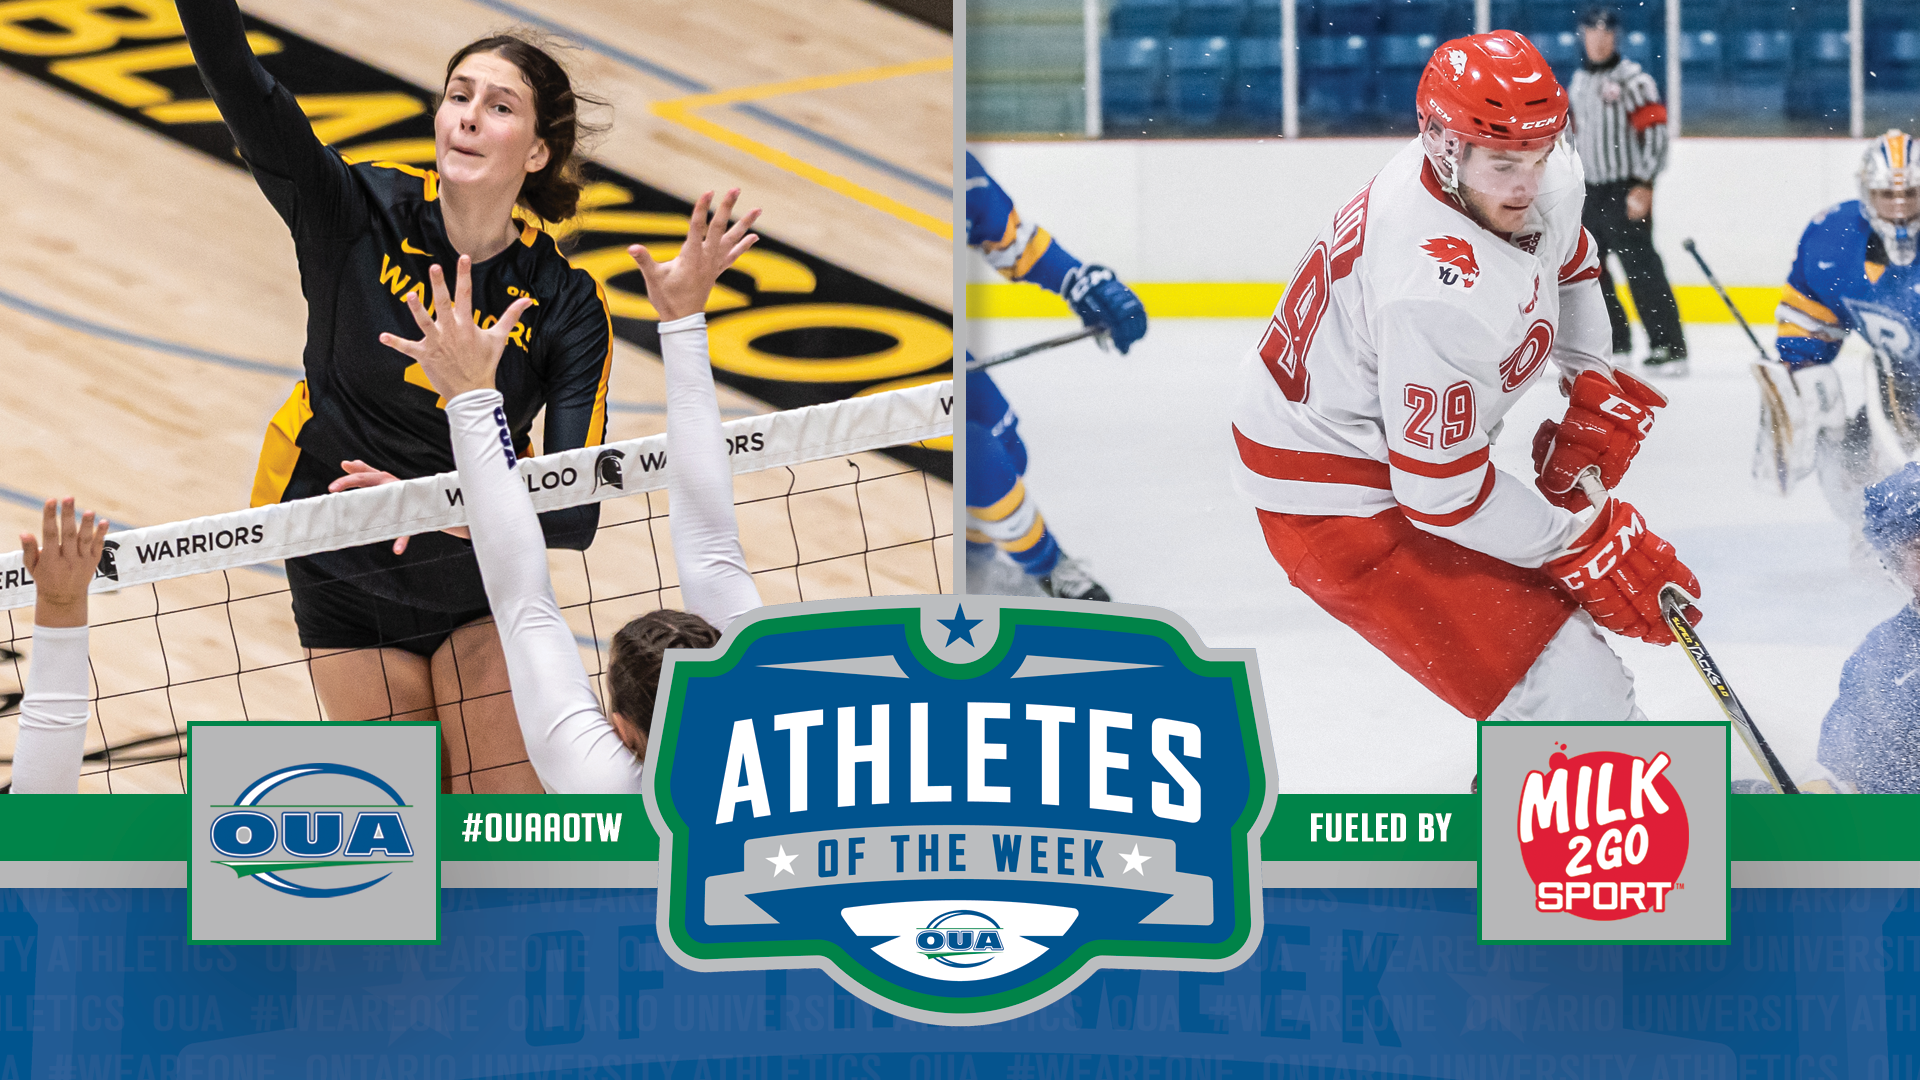 Glynn, Pouliot named OUA athletes of the week